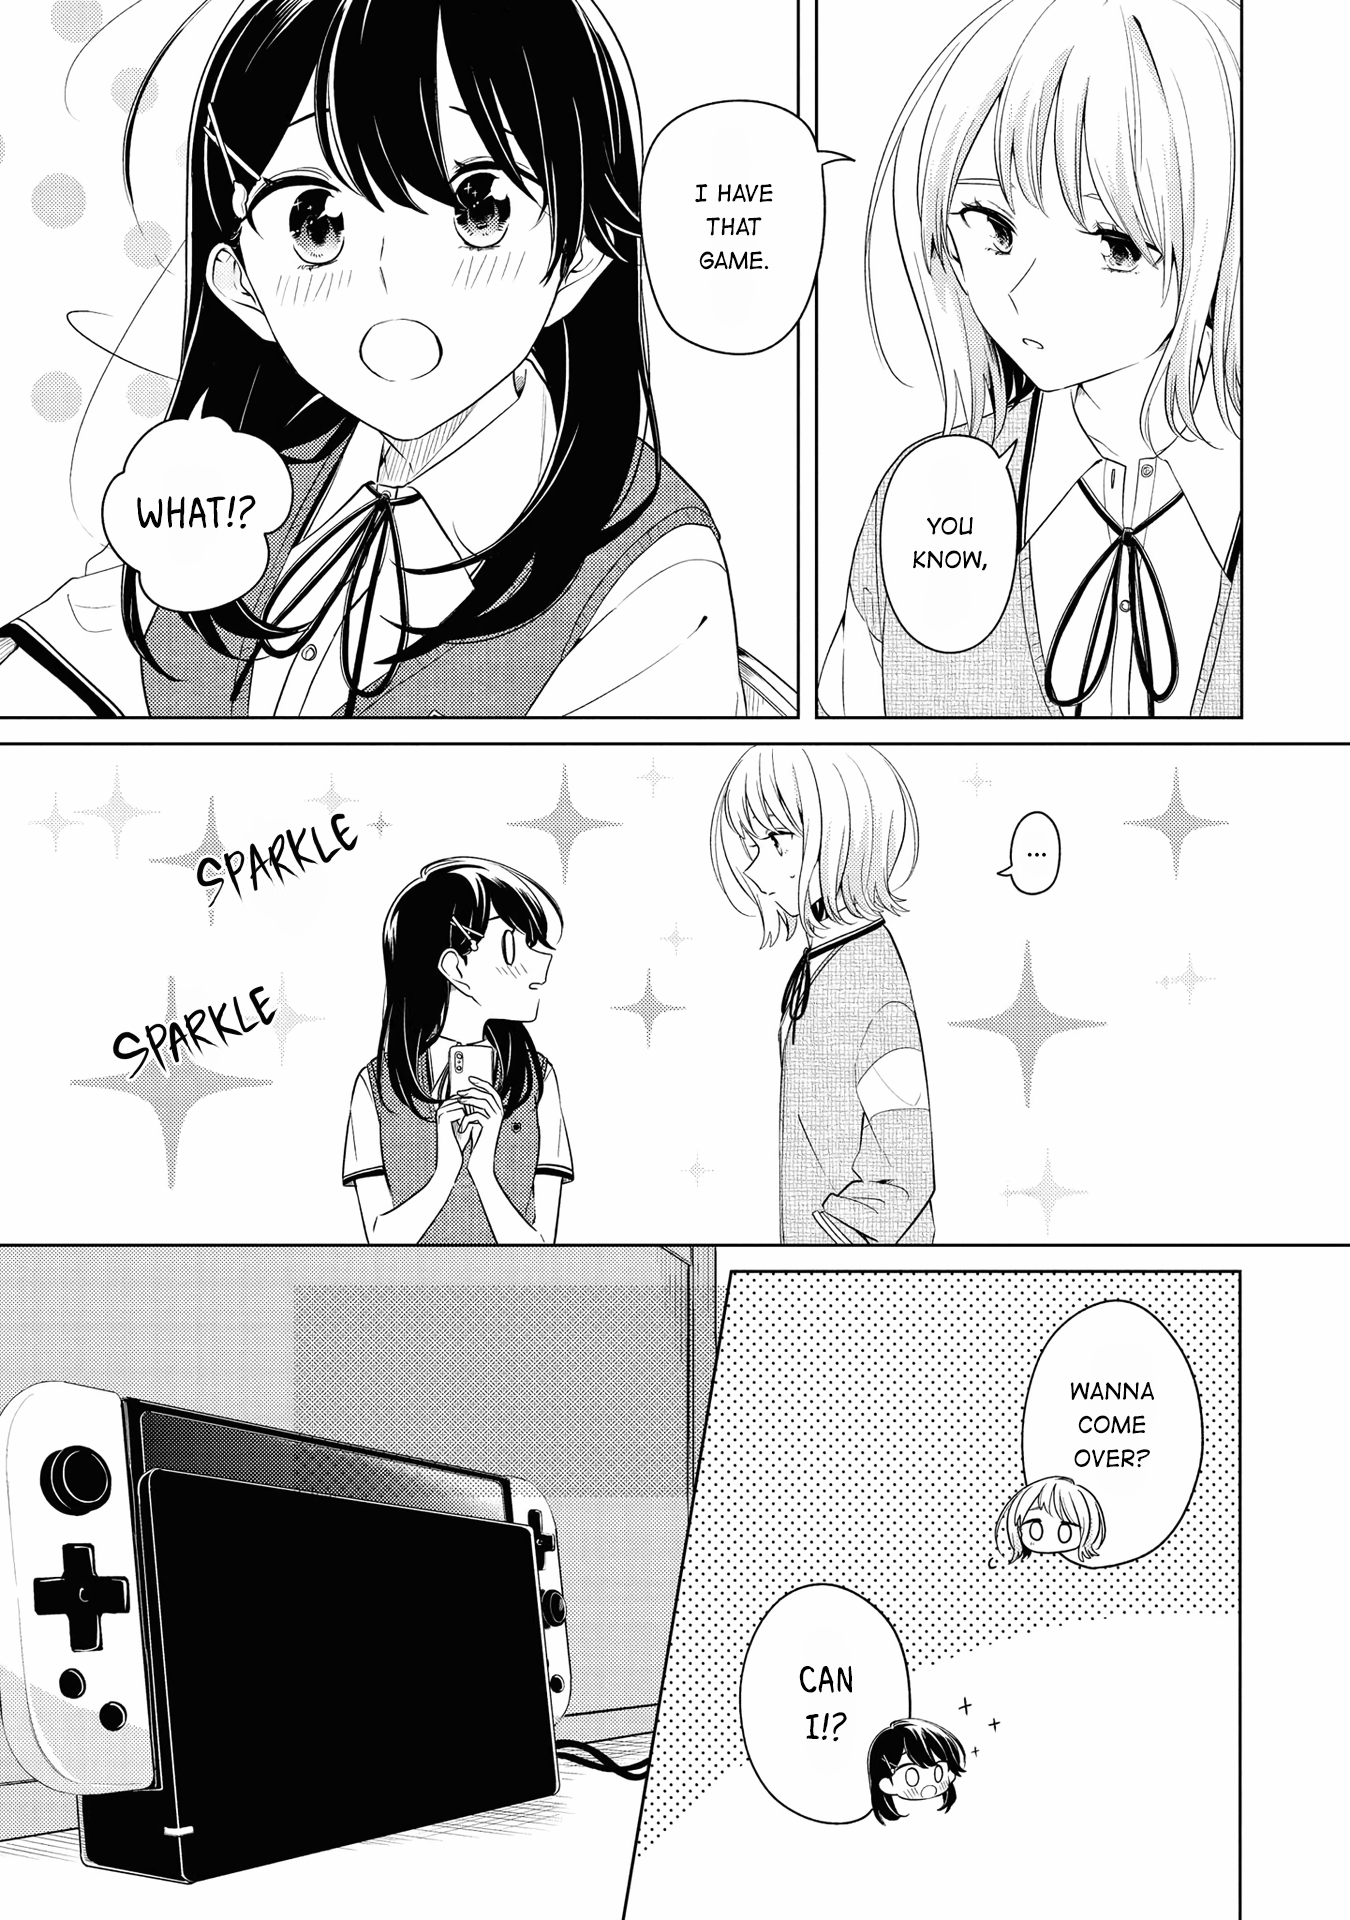 Can't Defy The Lonely Girl Vol.3 Chapter 15.1: Volume 3 Extras - Picture 2